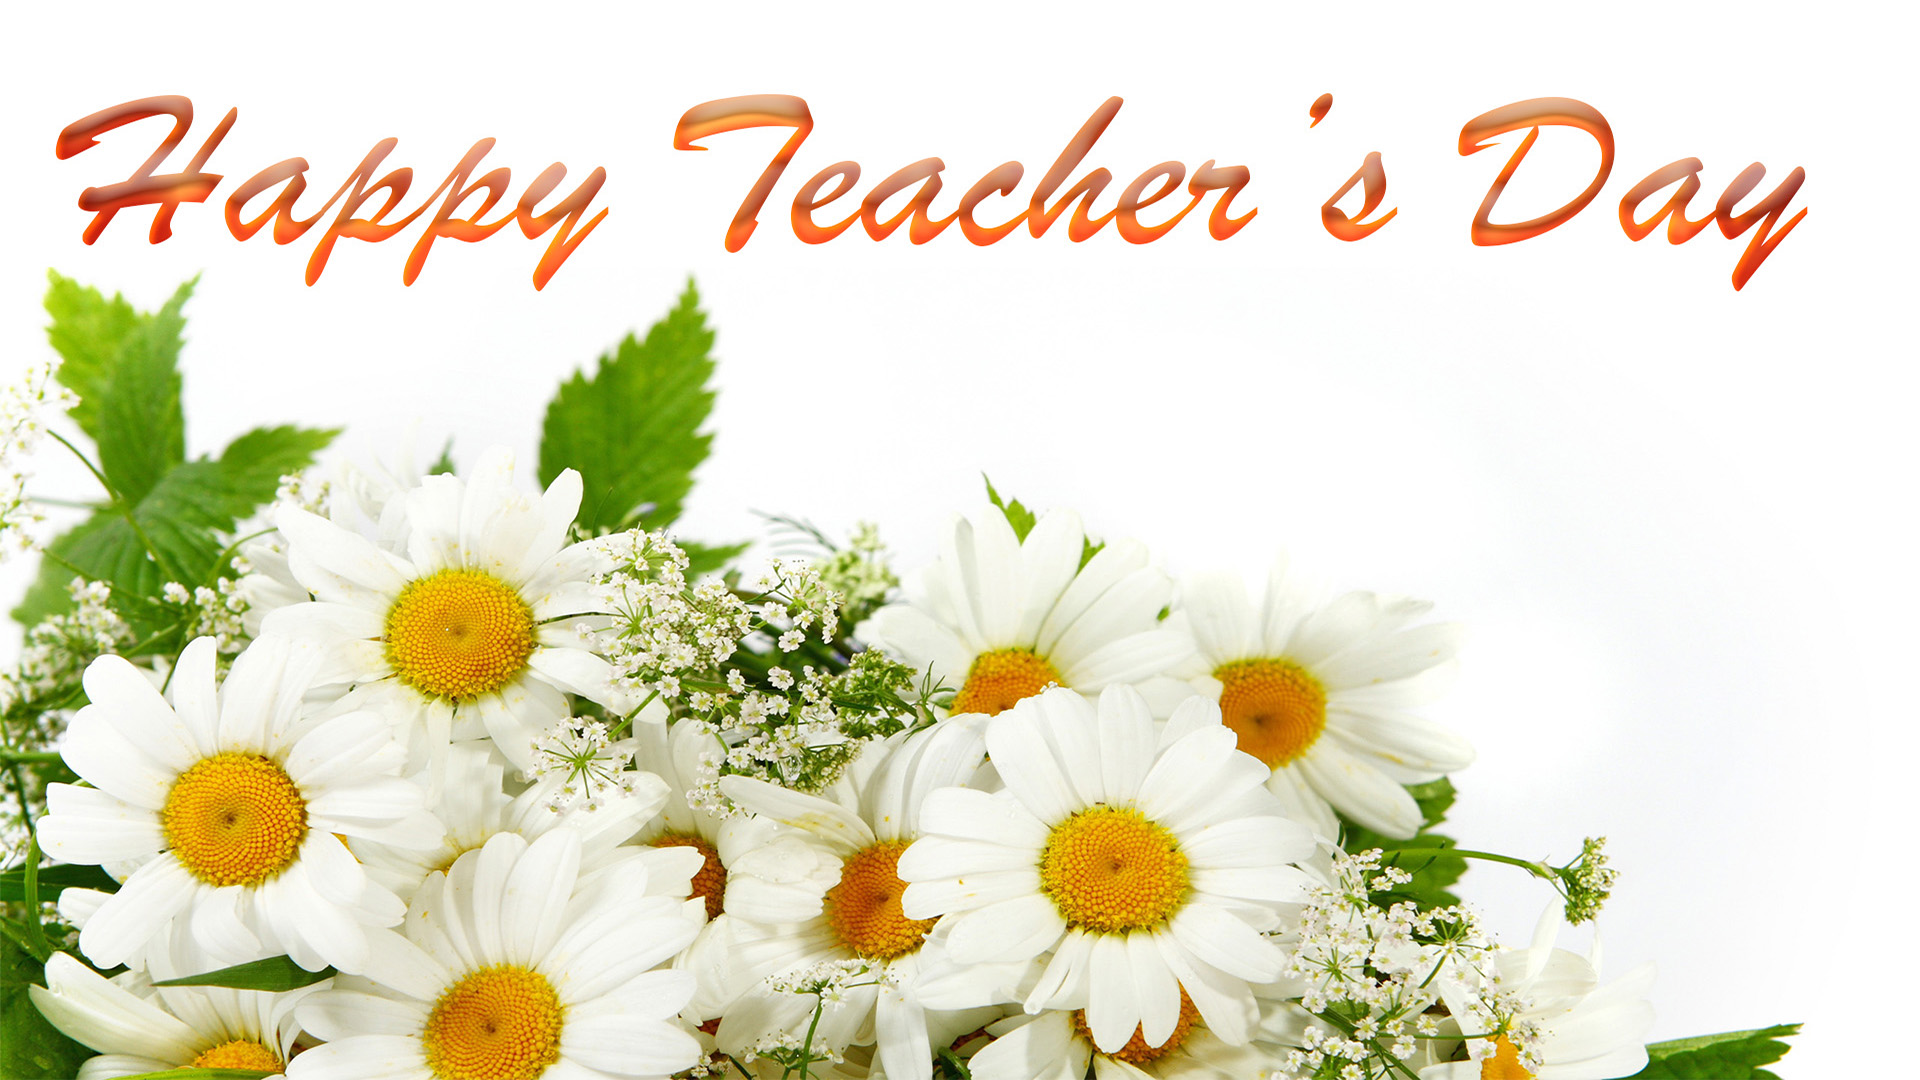 teachers day wishes hd image